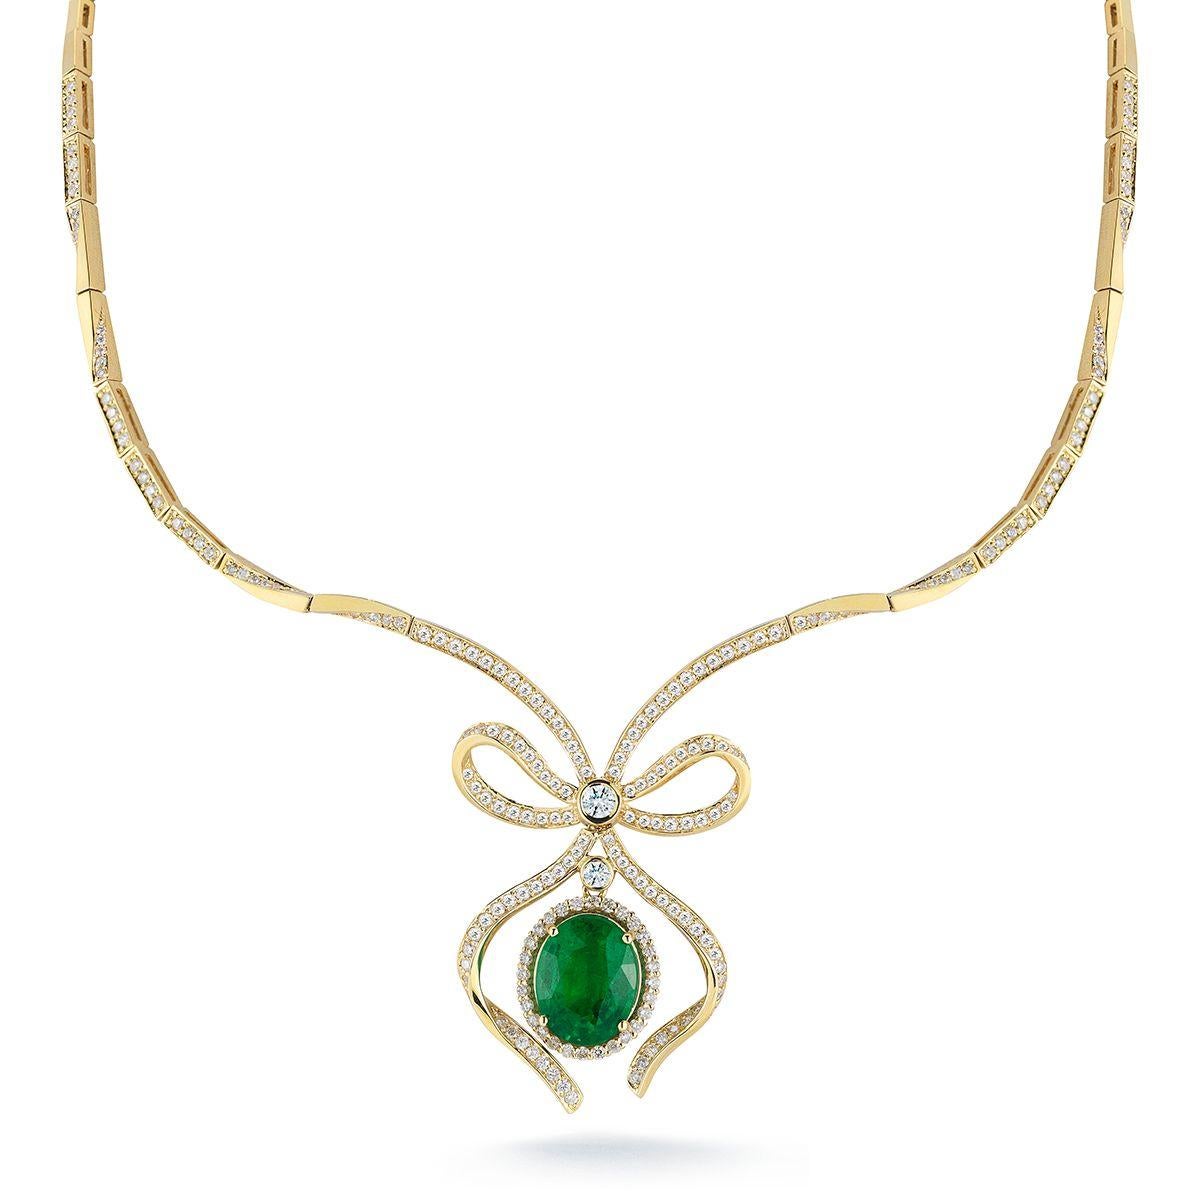  14k Yellow Gold 4.09ct Emerald Oval And 2.54ct Diamond Necklace

A unique design featuring a dynamic wrapped diamond necklace with a
pretty emerald bow as the centerpiece.
Item: # 02102
Metal: 14k Y
Color Weight: 4.09 ct.
Diamond Weight: 2.54 ct.